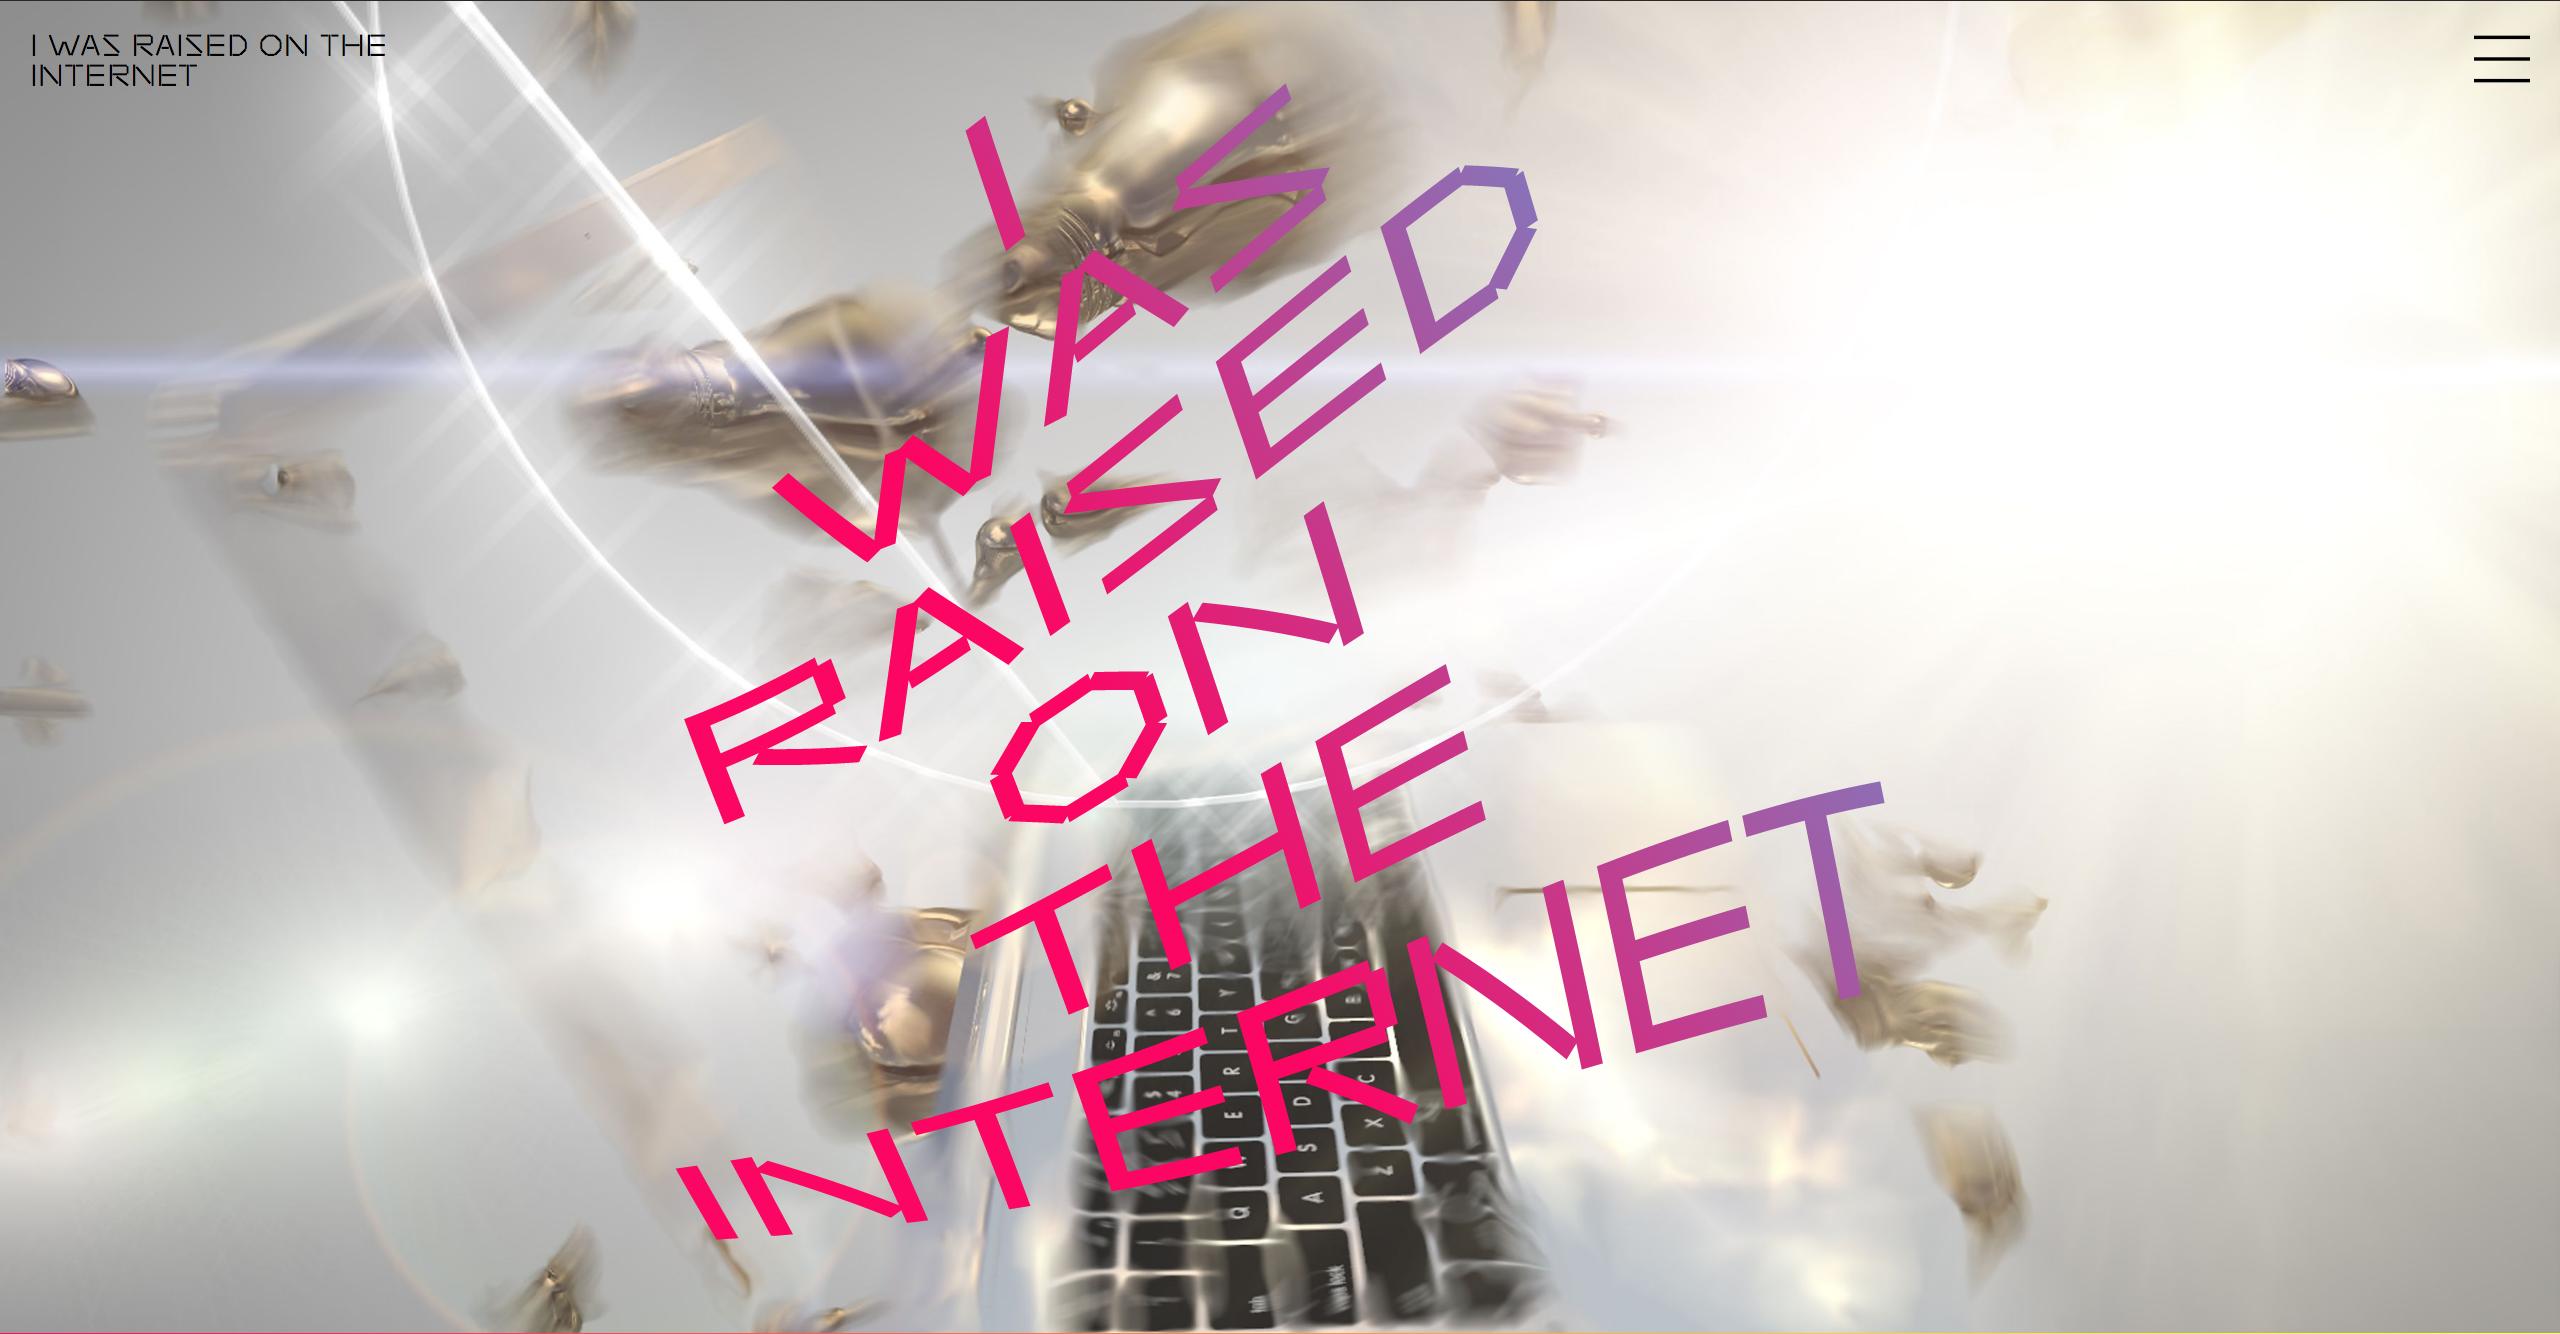 Fuchsia and purple gradient text reading "I WAS RAISED ON THE INTERNET" appears over a dynamic image of a bright flare of light and a computer keyboard.